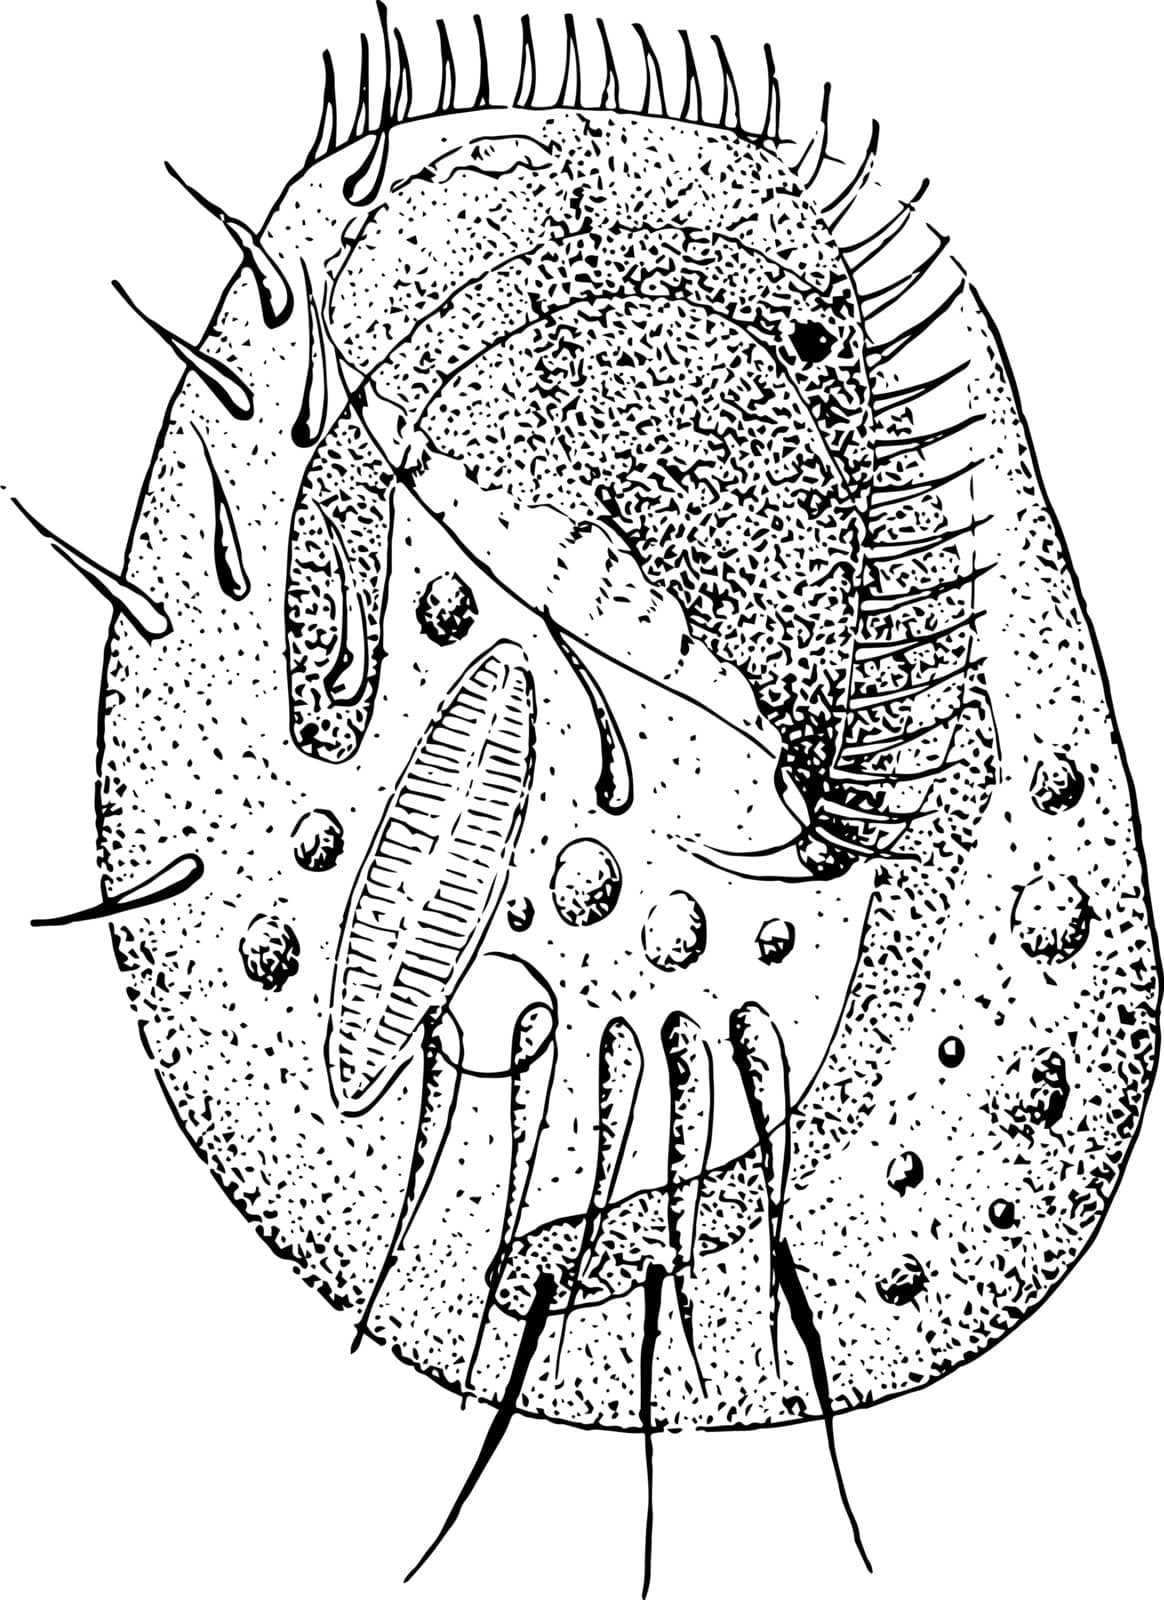 Infusoria is an obsolete collective term for minute aquatic creatures, vintage line drawing or engraving illustration.